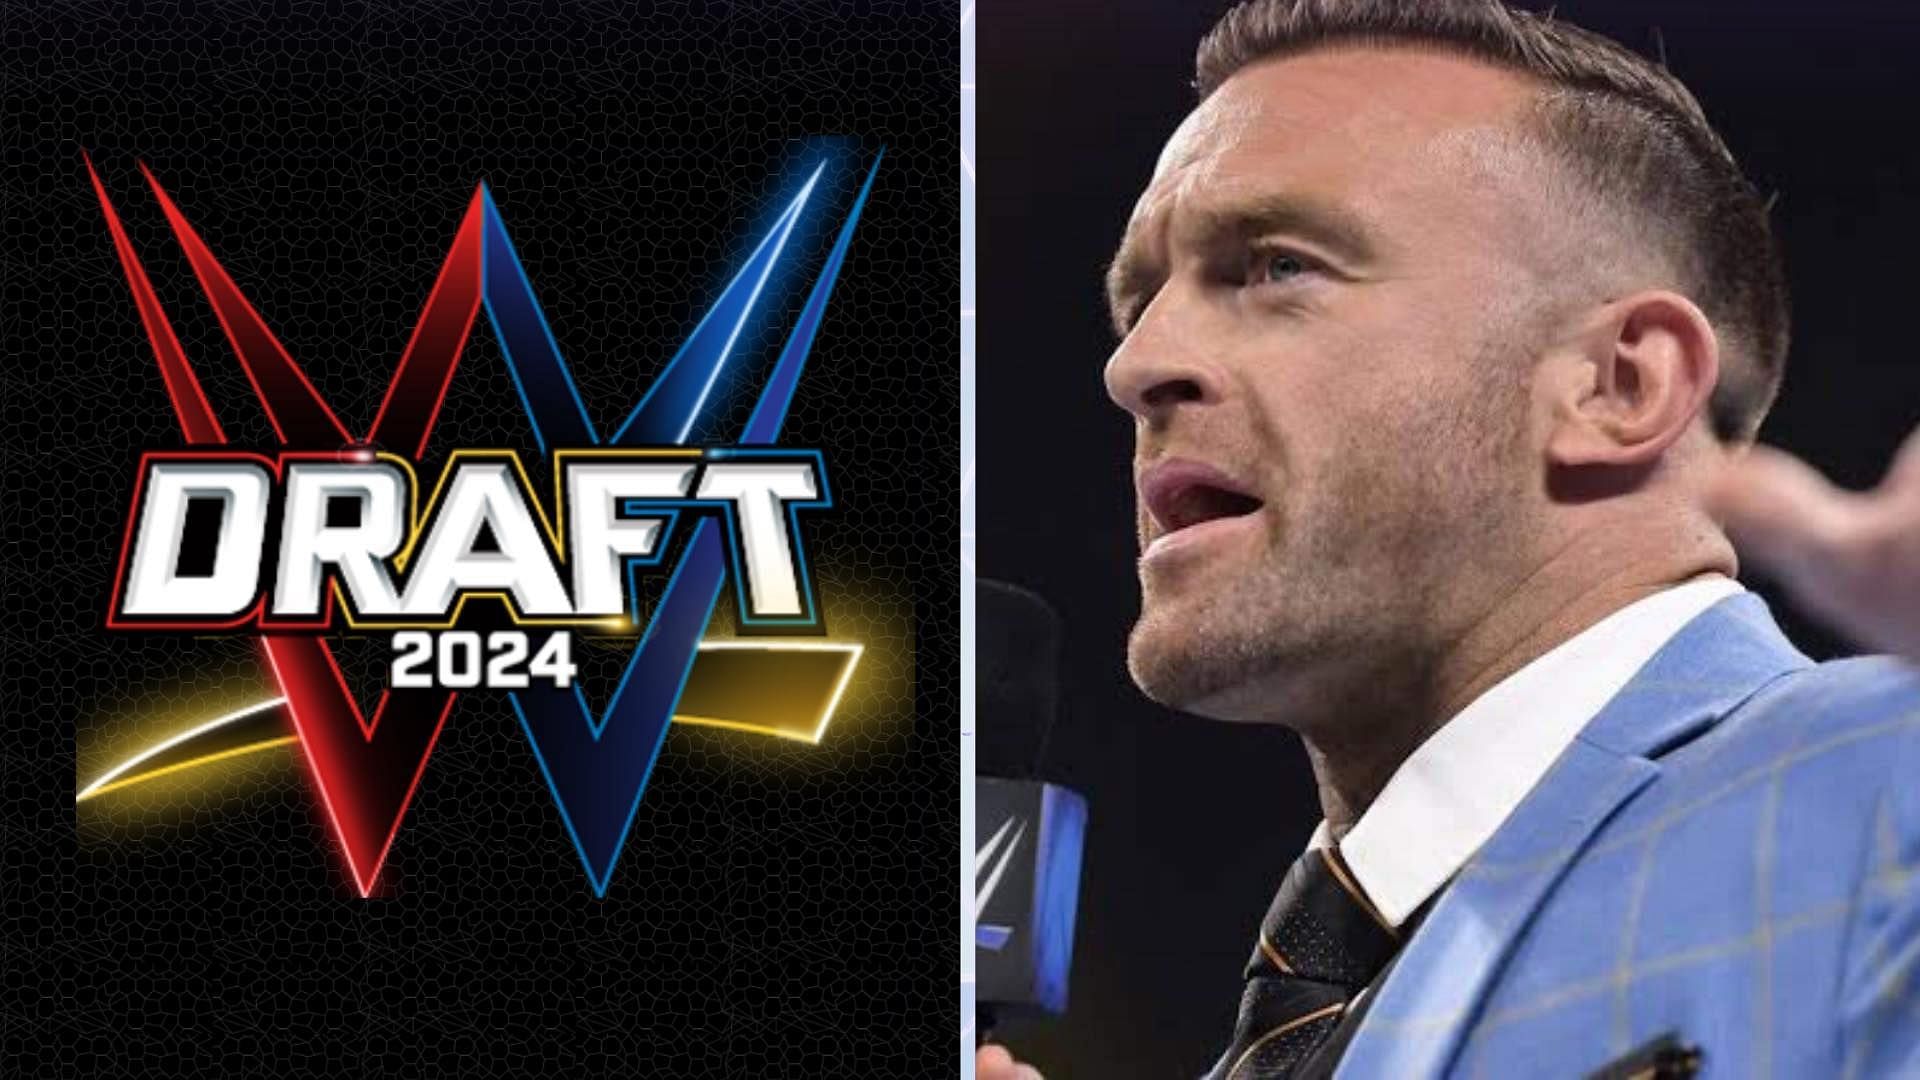 Nick Aldis will have the honor of hosting the first night of the WWE Draft.